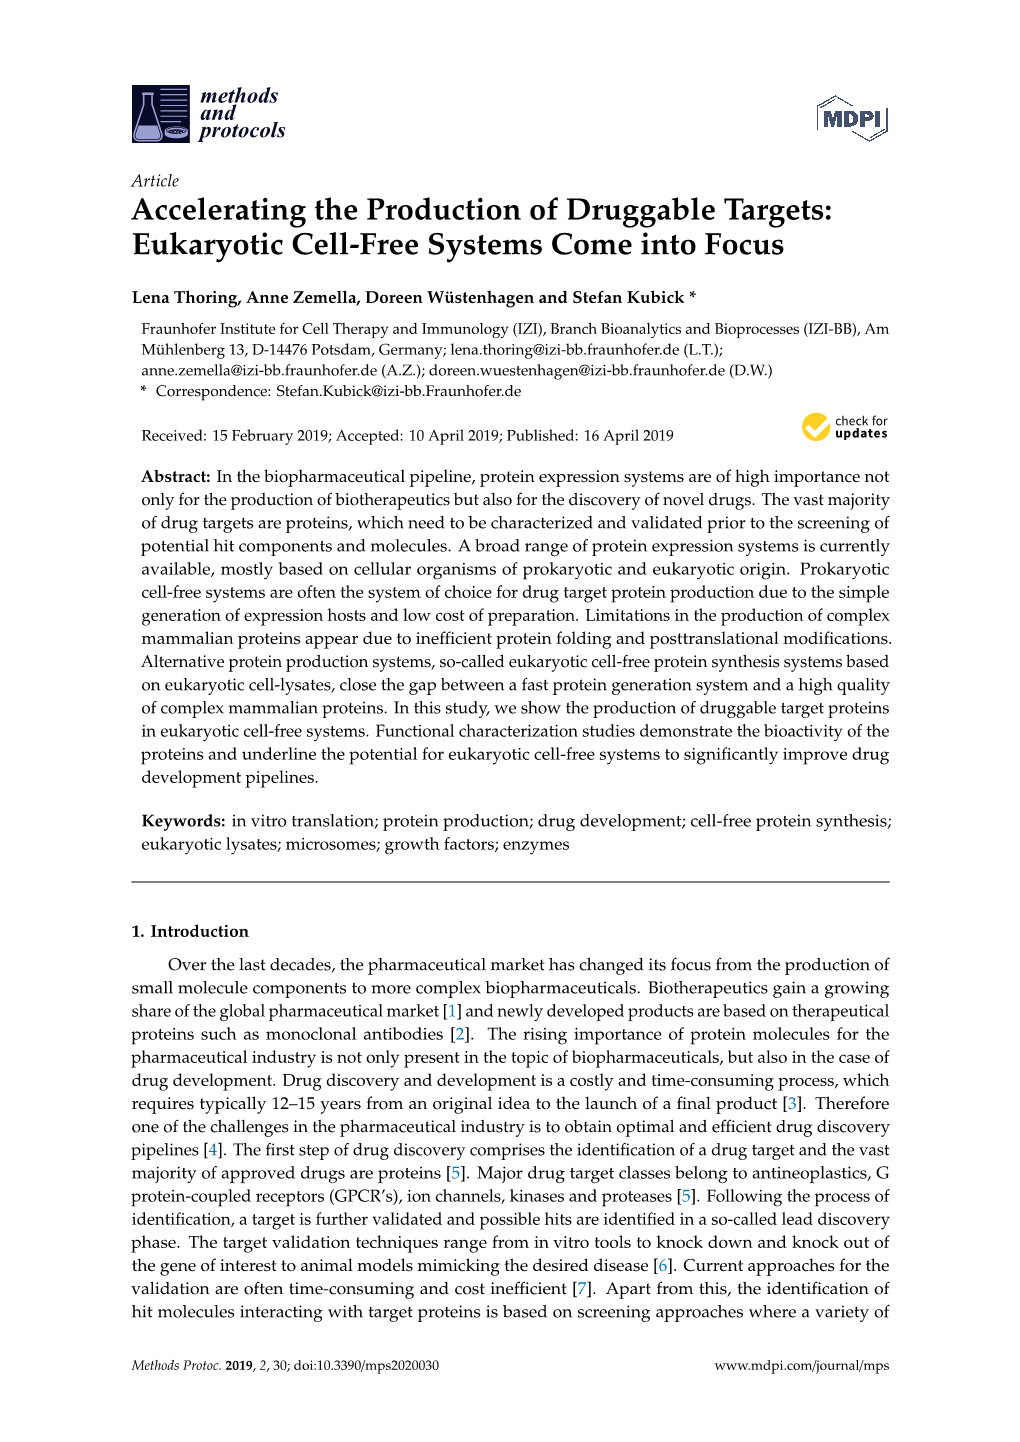 Eukaryotic Cell-Free Systems Come Into Focus